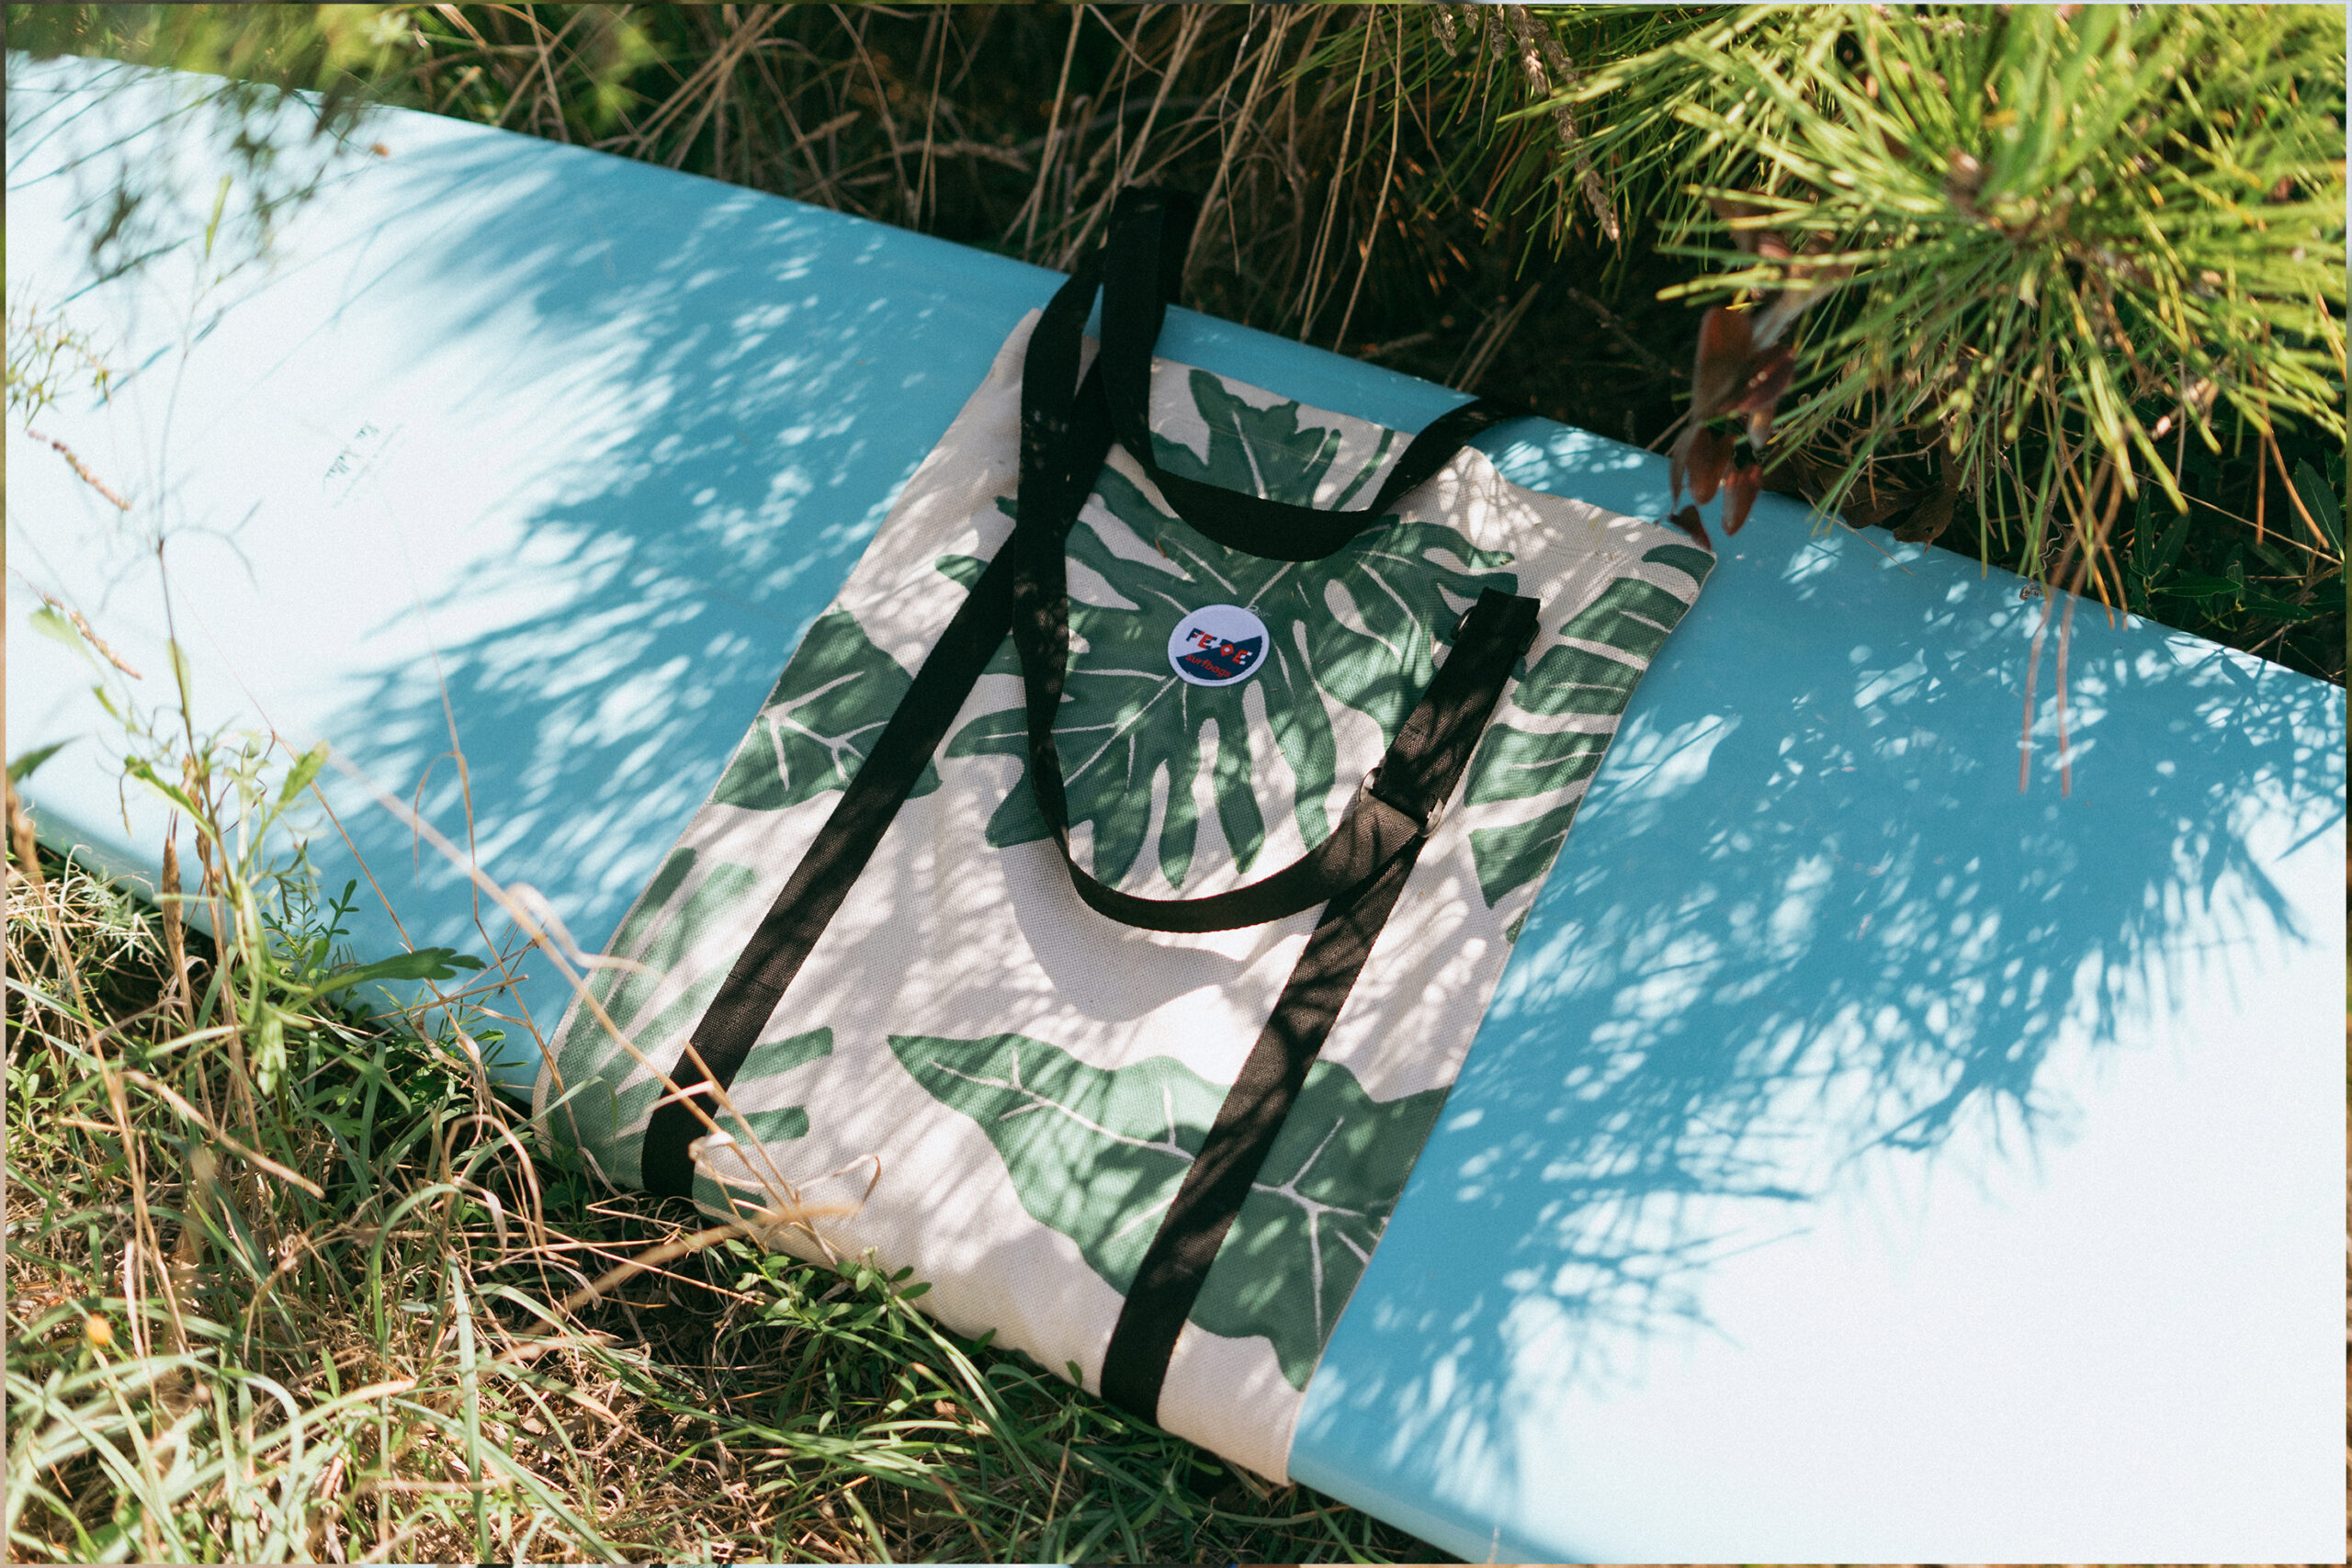 Surfboard Carrier - Surf Slin Bag to carry longboard or heavy surfboards to the beach. Made to order and hand painted with a tropical leaf design by Fede Surfbags in Italy.